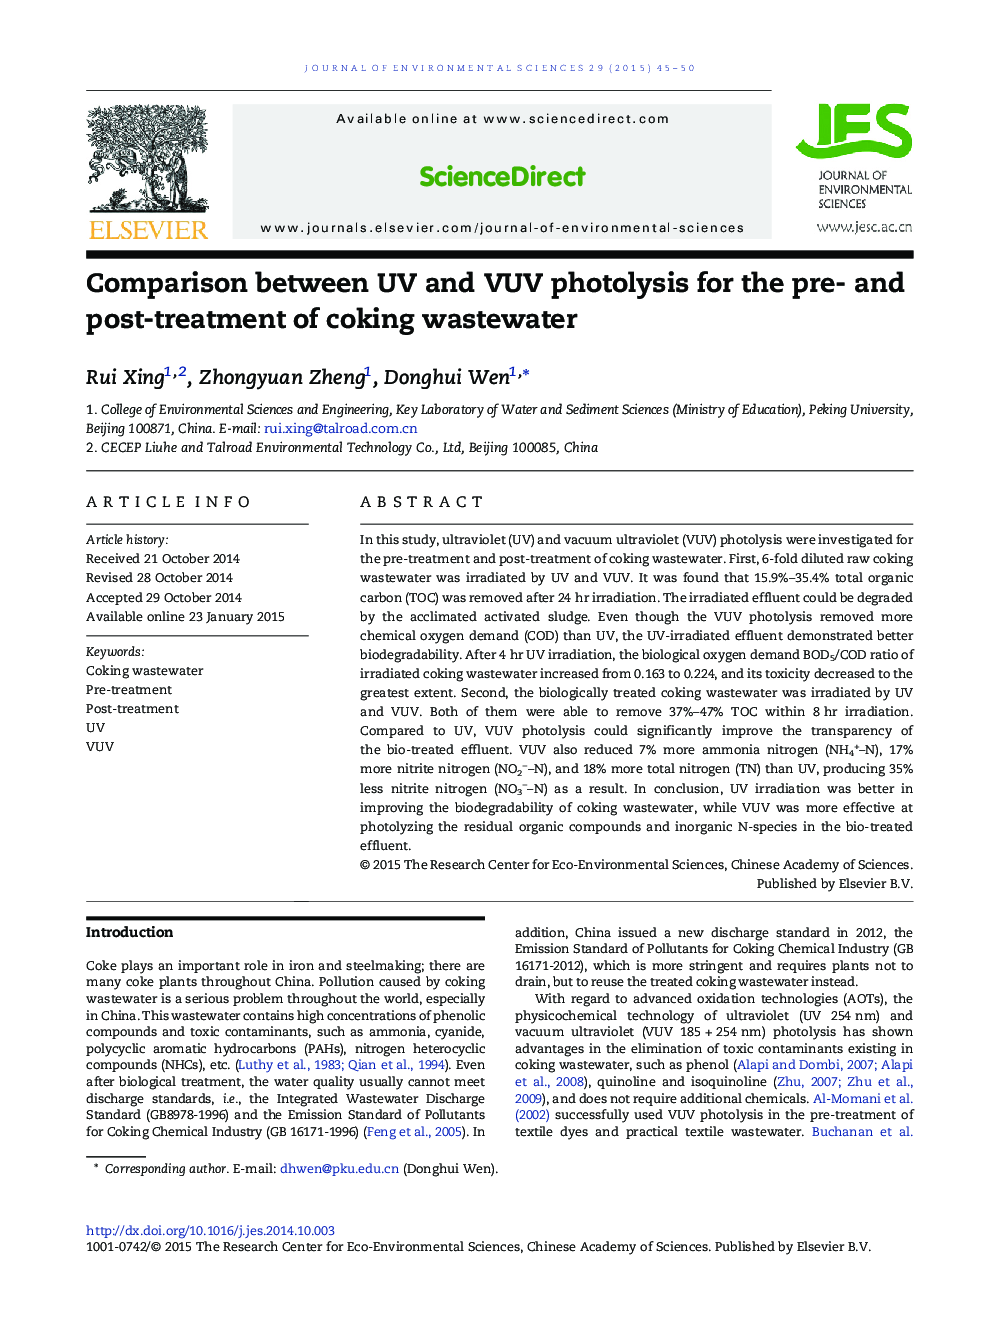 Comparison between UV and VUV photolysis for the pre- and post-treatment of coking wastewater